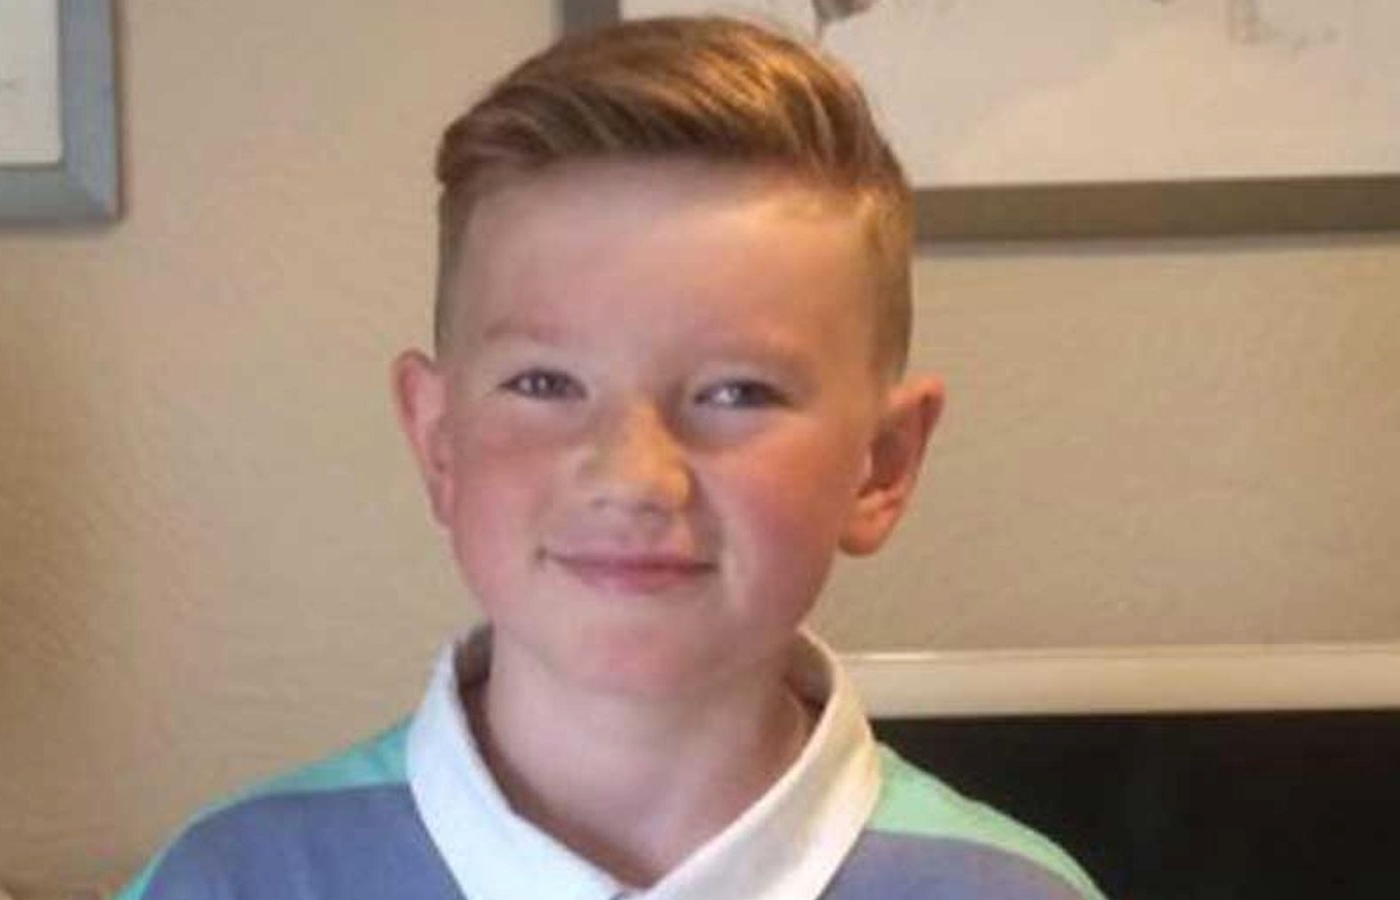 Alex Batty went missing aged 11 in 2017. Photo: Greater Manchester Police.